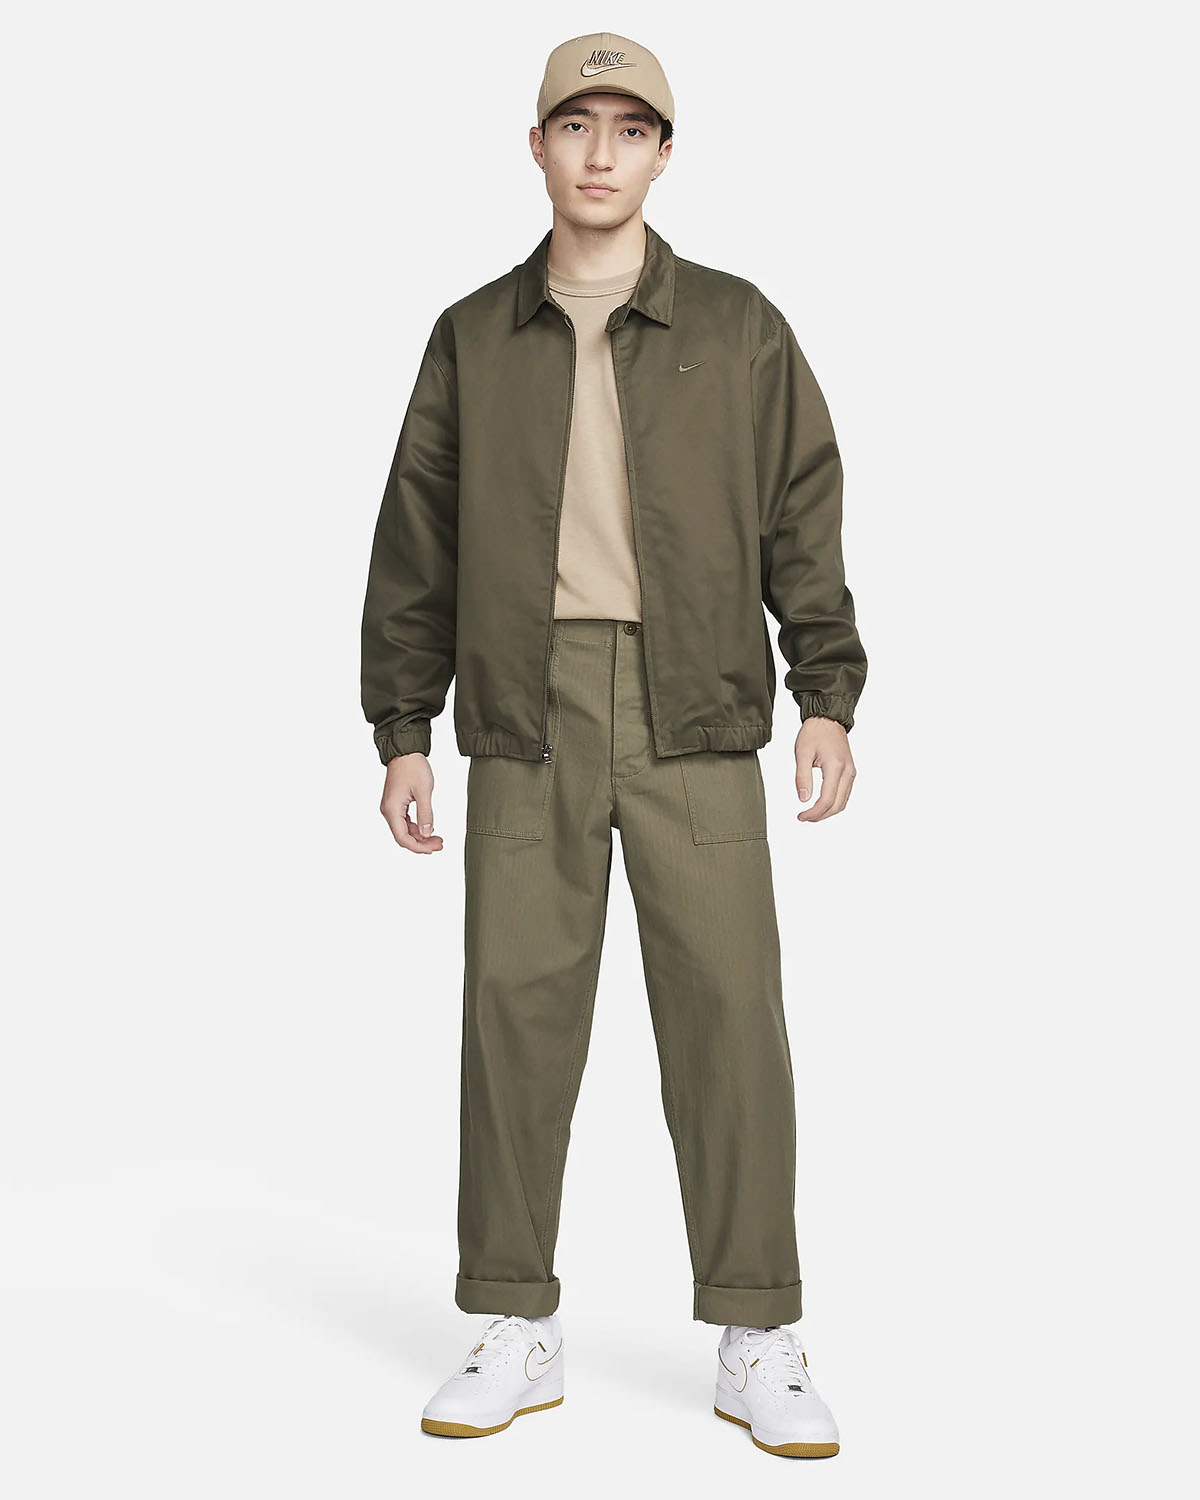 Nike Medium Olive Outfit